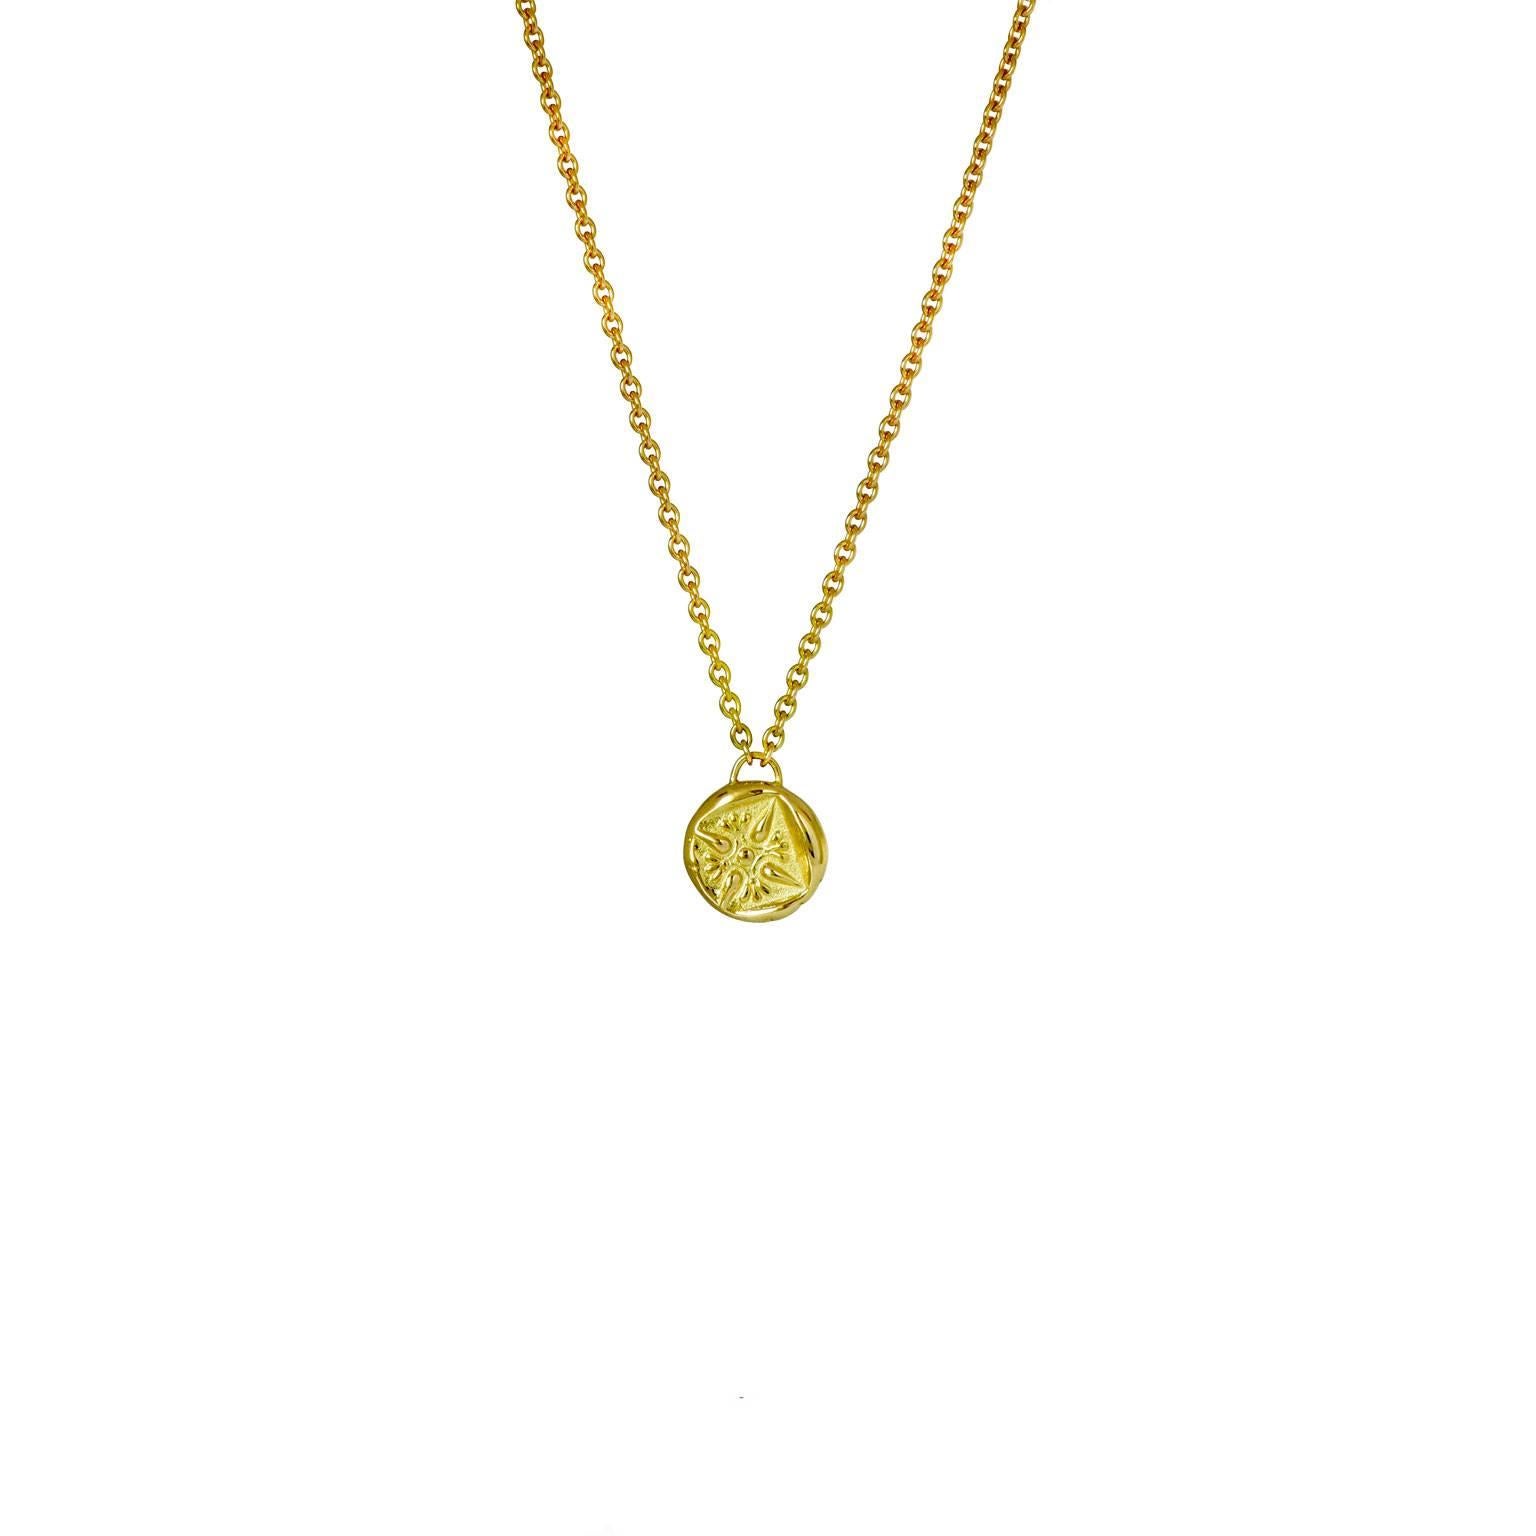 Feel majestic with our beautiful roaring yellow gold lion necklace. The small intricate pendant hangs on a fine trace chain and features a stellate pattern in an incuse square on it's reverse side. 

The first of Heracles' twelve labours, was to